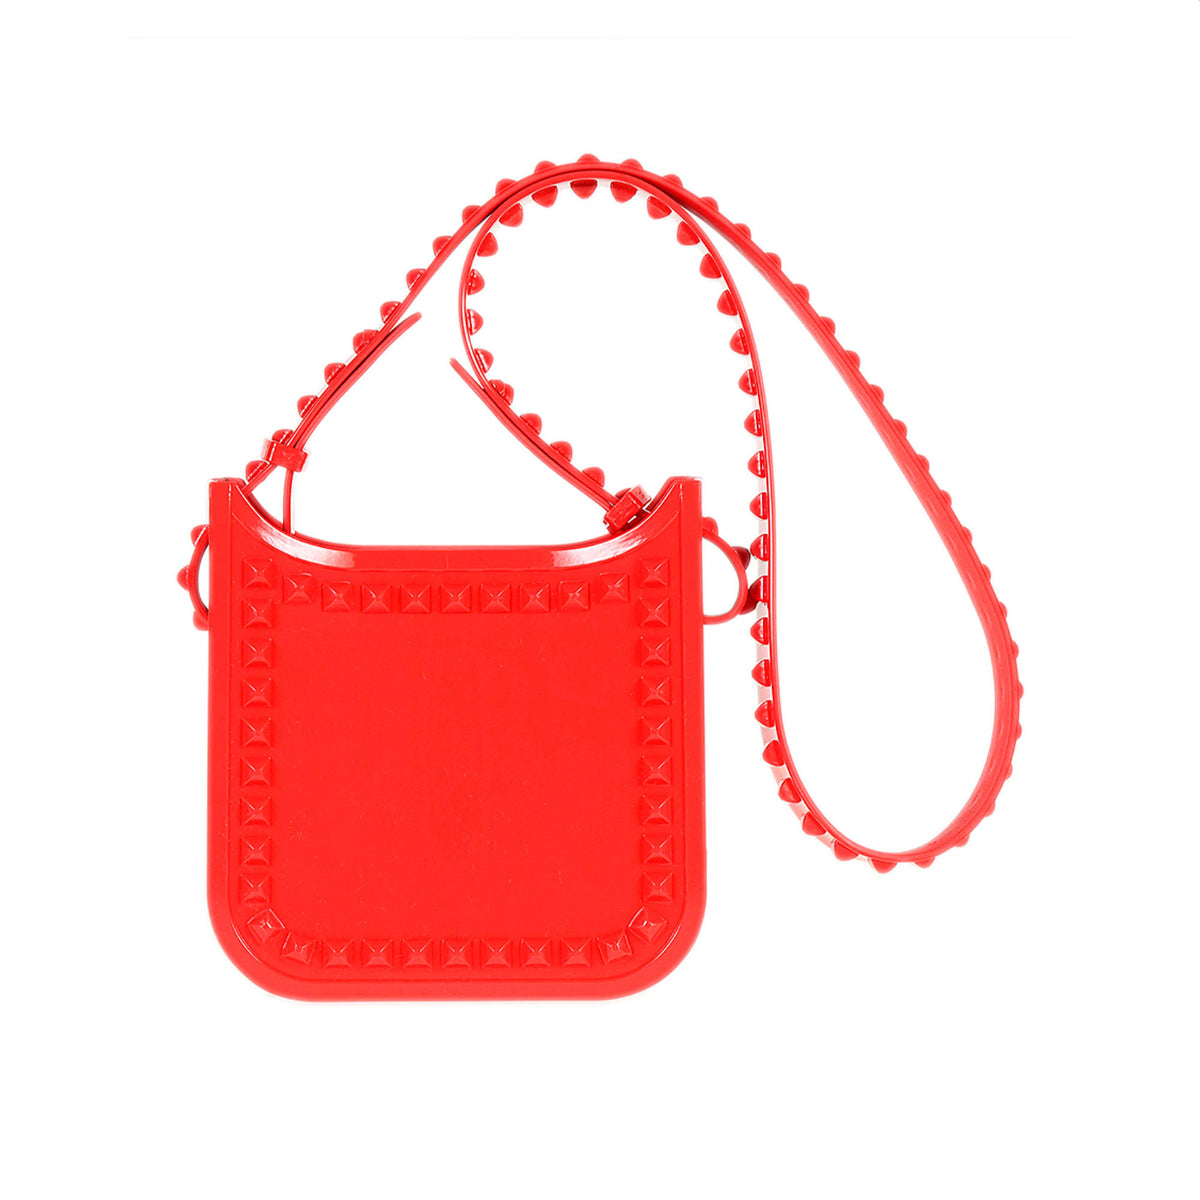 Perfect handsfree jelly purse in color red from Carmen Sol